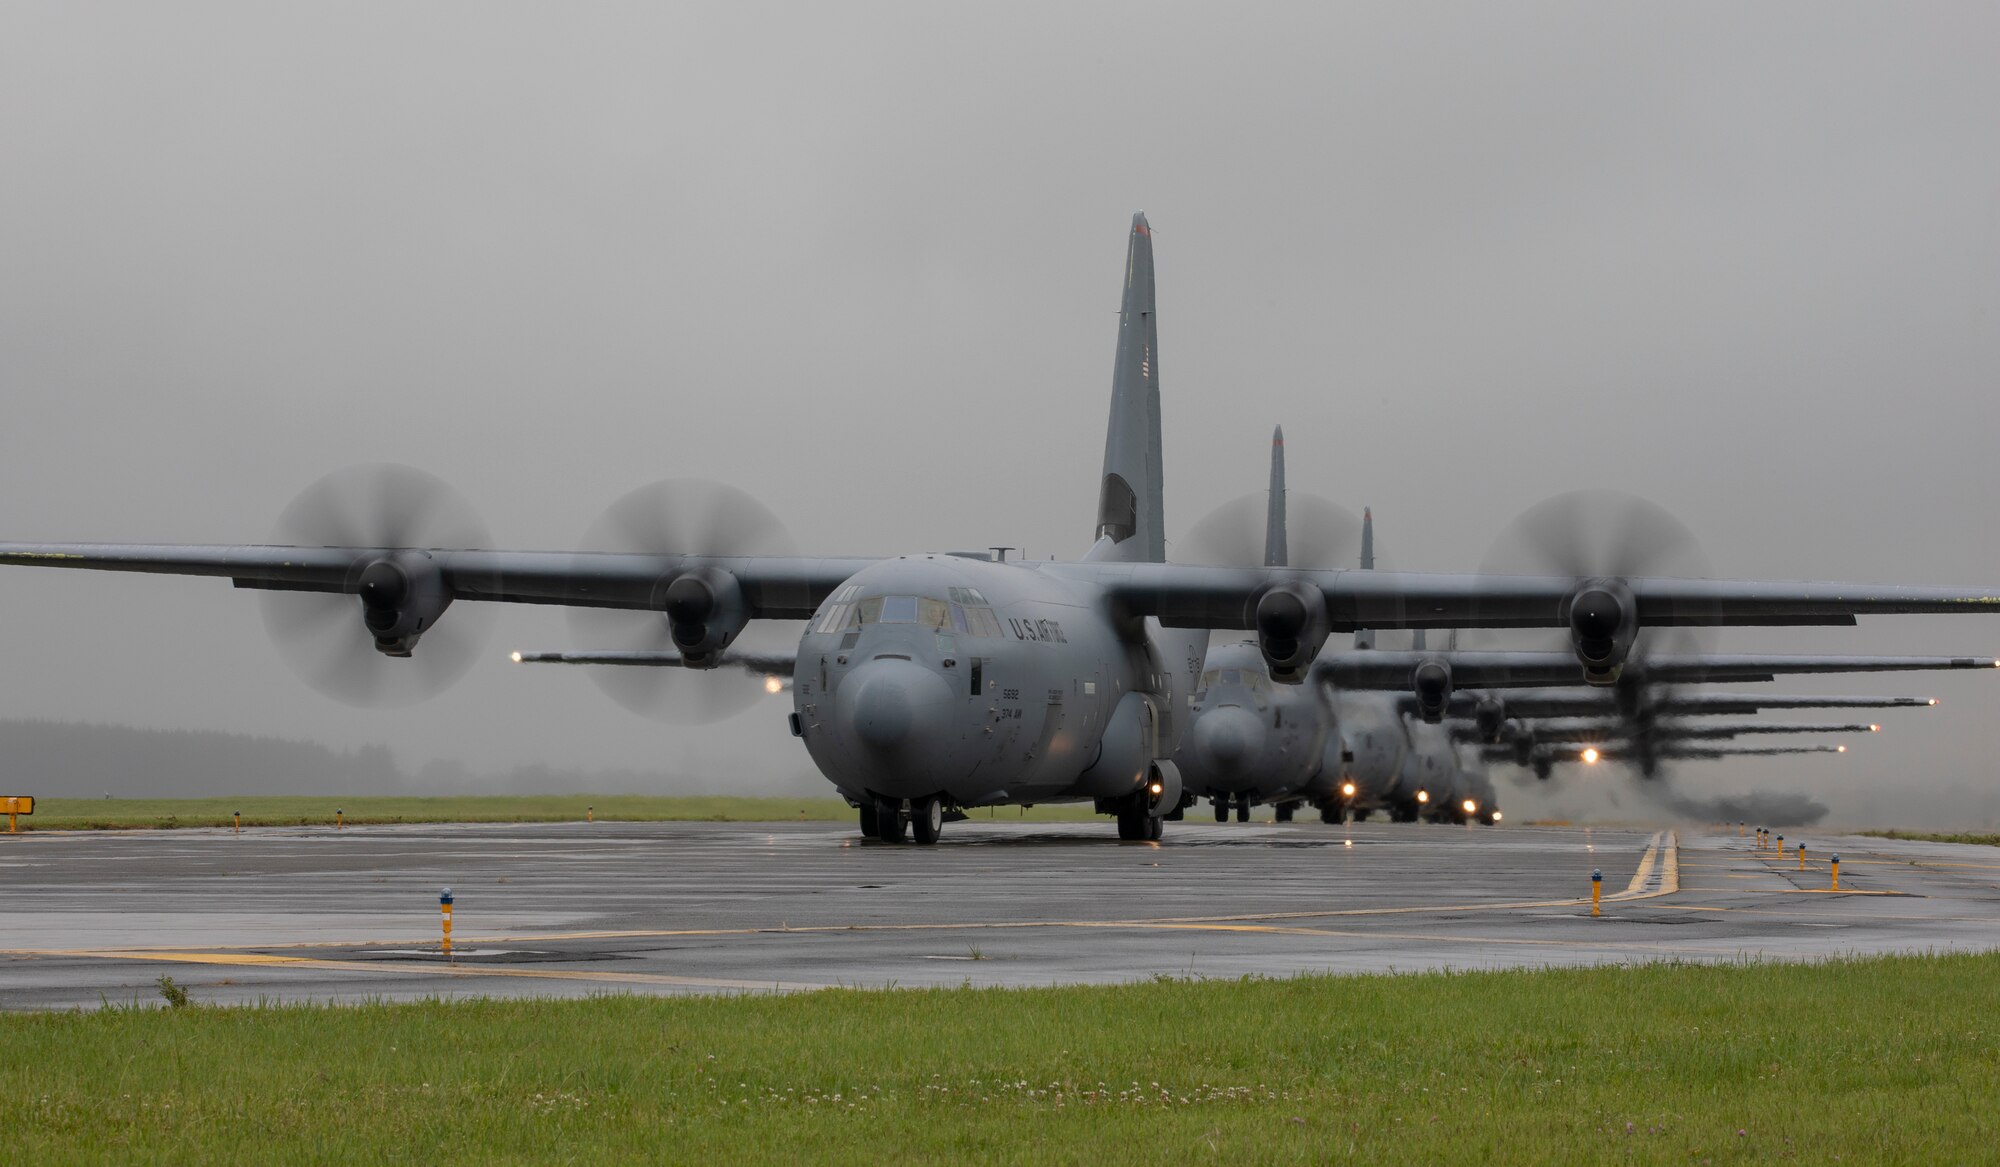 Seven C-130J Super Hercules aircraft from the 374th Airlift Wing fly line up on the flightline as part of the elephant walk portion of the Samurai Surge training exercise at Yokota Air Base, Japan, May 21, 2020.